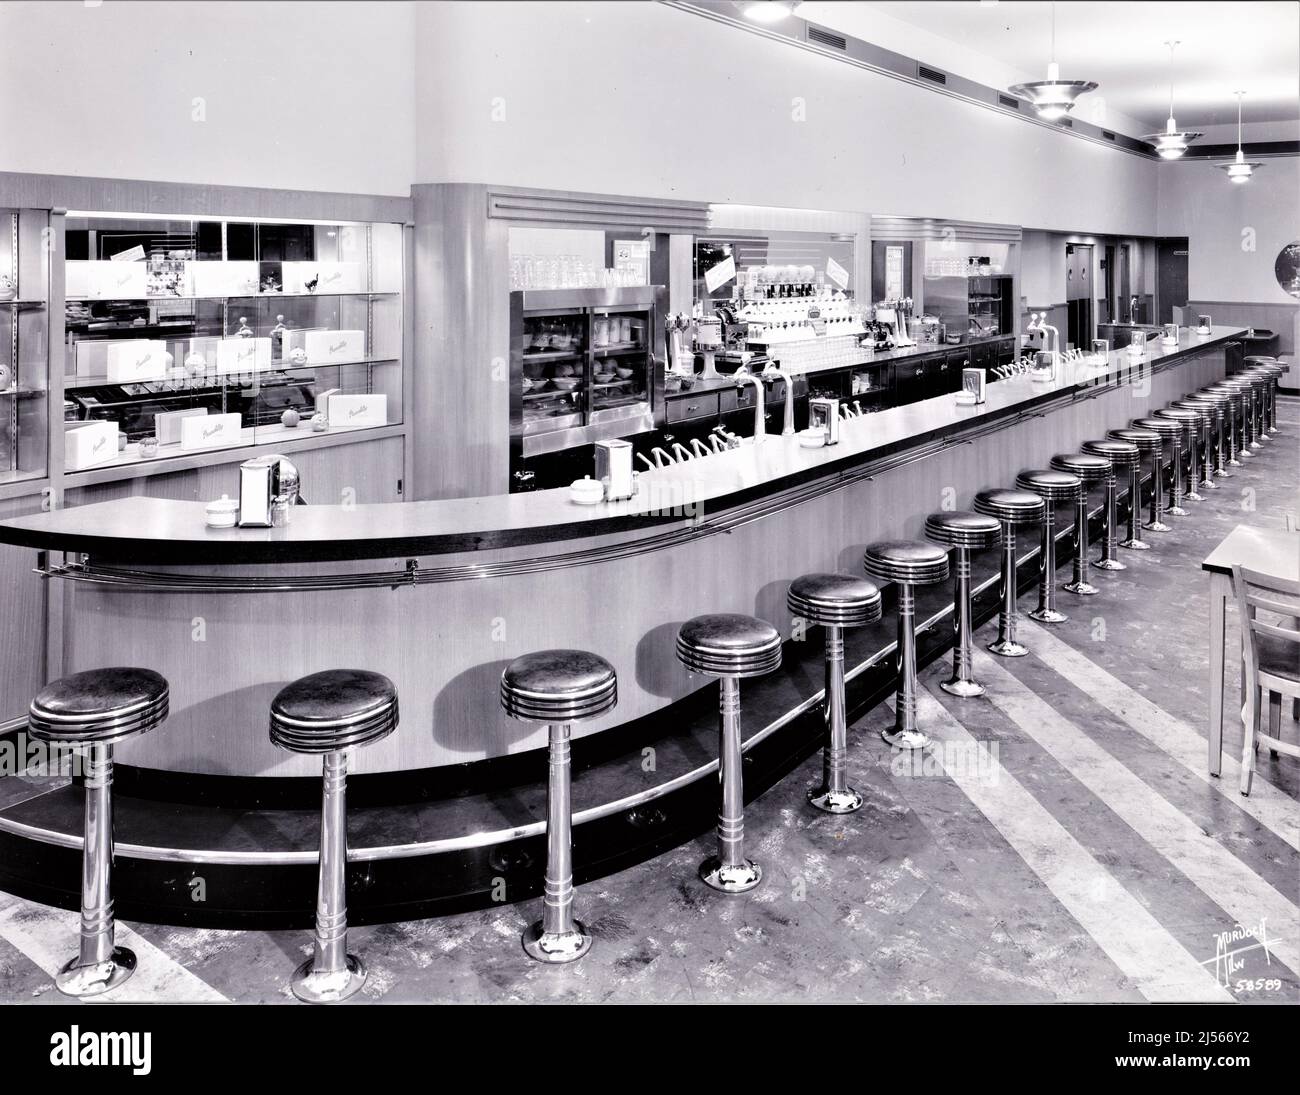 Soda shop, malt shop, soda fountain, lunch counter. A 1950s, cleanly-designed, long counter with about 20 rotating stools for seating. This shop doesn't have the really fancy art deco design of earlier years, but is lighter and brighter. The first soda fountain counters were created in the late 1800s, in pharmacies. The pharmacist served his customers mixed syrups and flavors mixed into chilled soda water, sometimes as a healthy drink and sometimes simply as a refreshing drink. Stock Photo